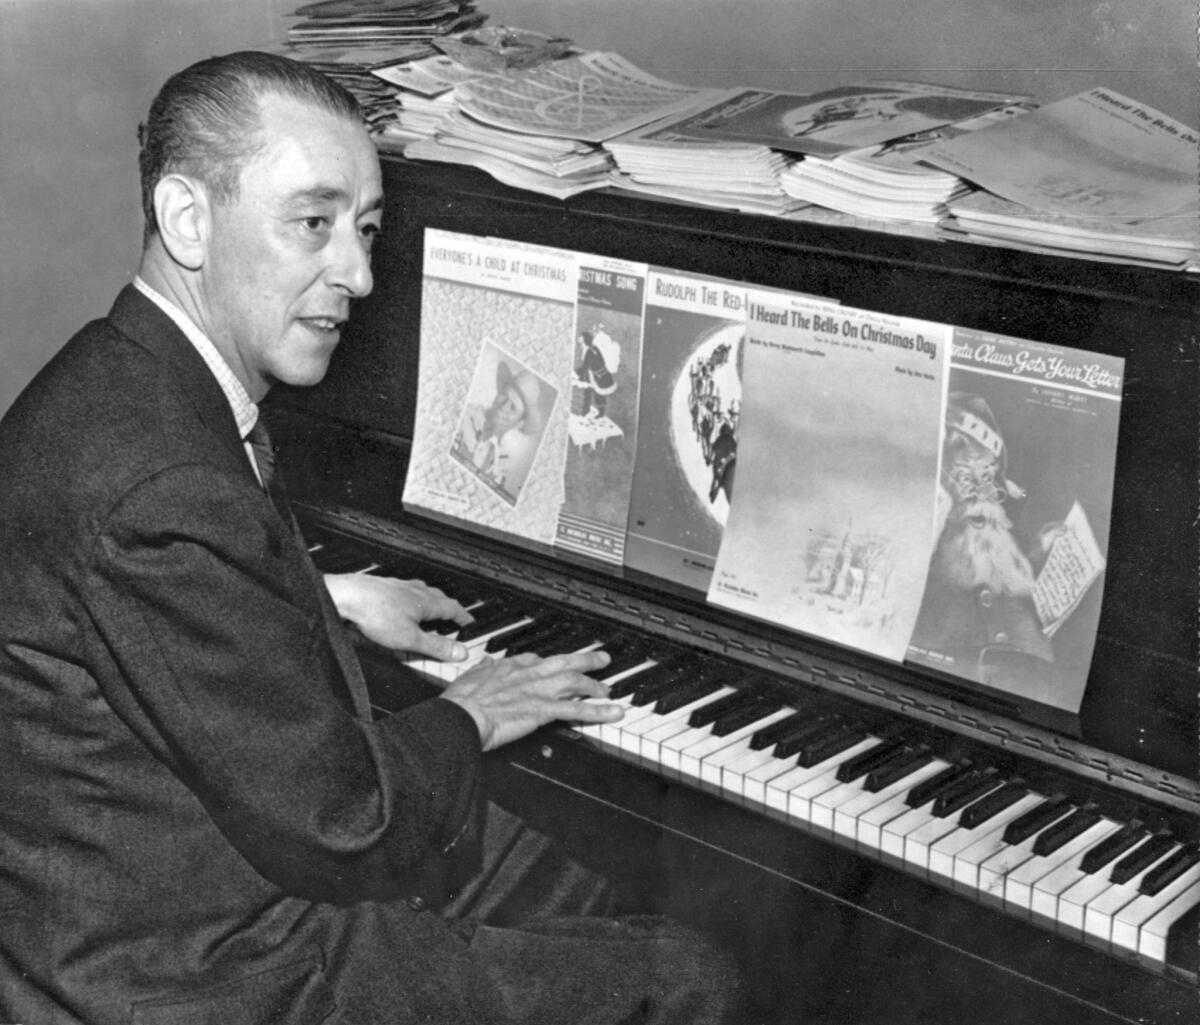 Johnny Marks, writer of the hit song "Rudolph, the Red-Nosed Reindeer" and other Christmas hits, in 1956.